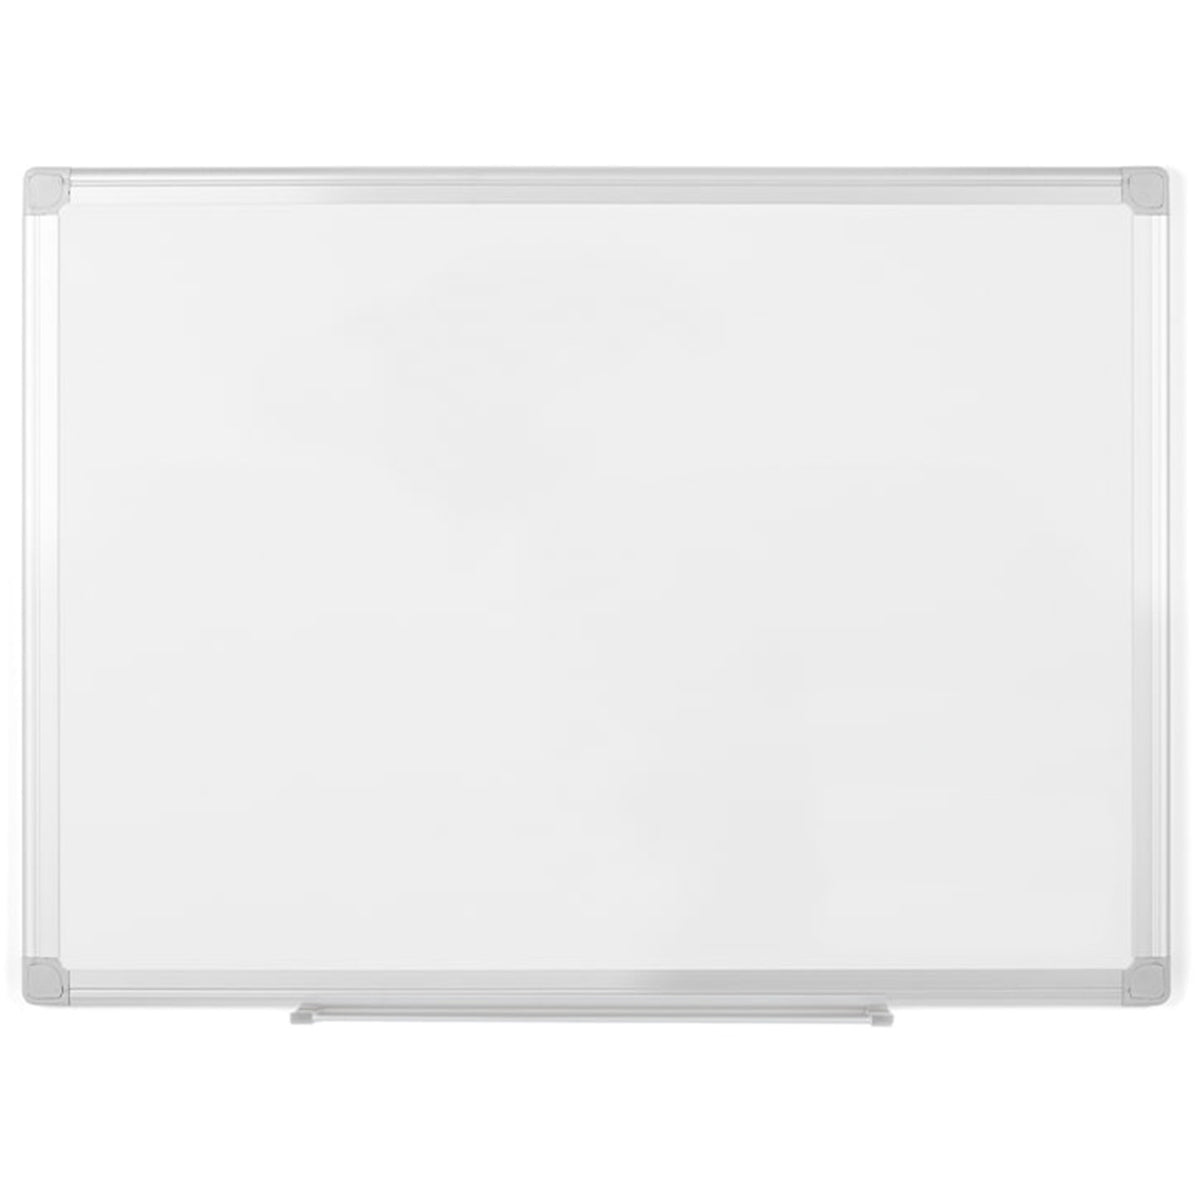 MA0300790 Earth Series Double Sided Melamine Dry Erase Board, 100% Recycled Frame, Snap-On Marker Tray, 24" x 36", Aluminum Frame by MasterVision